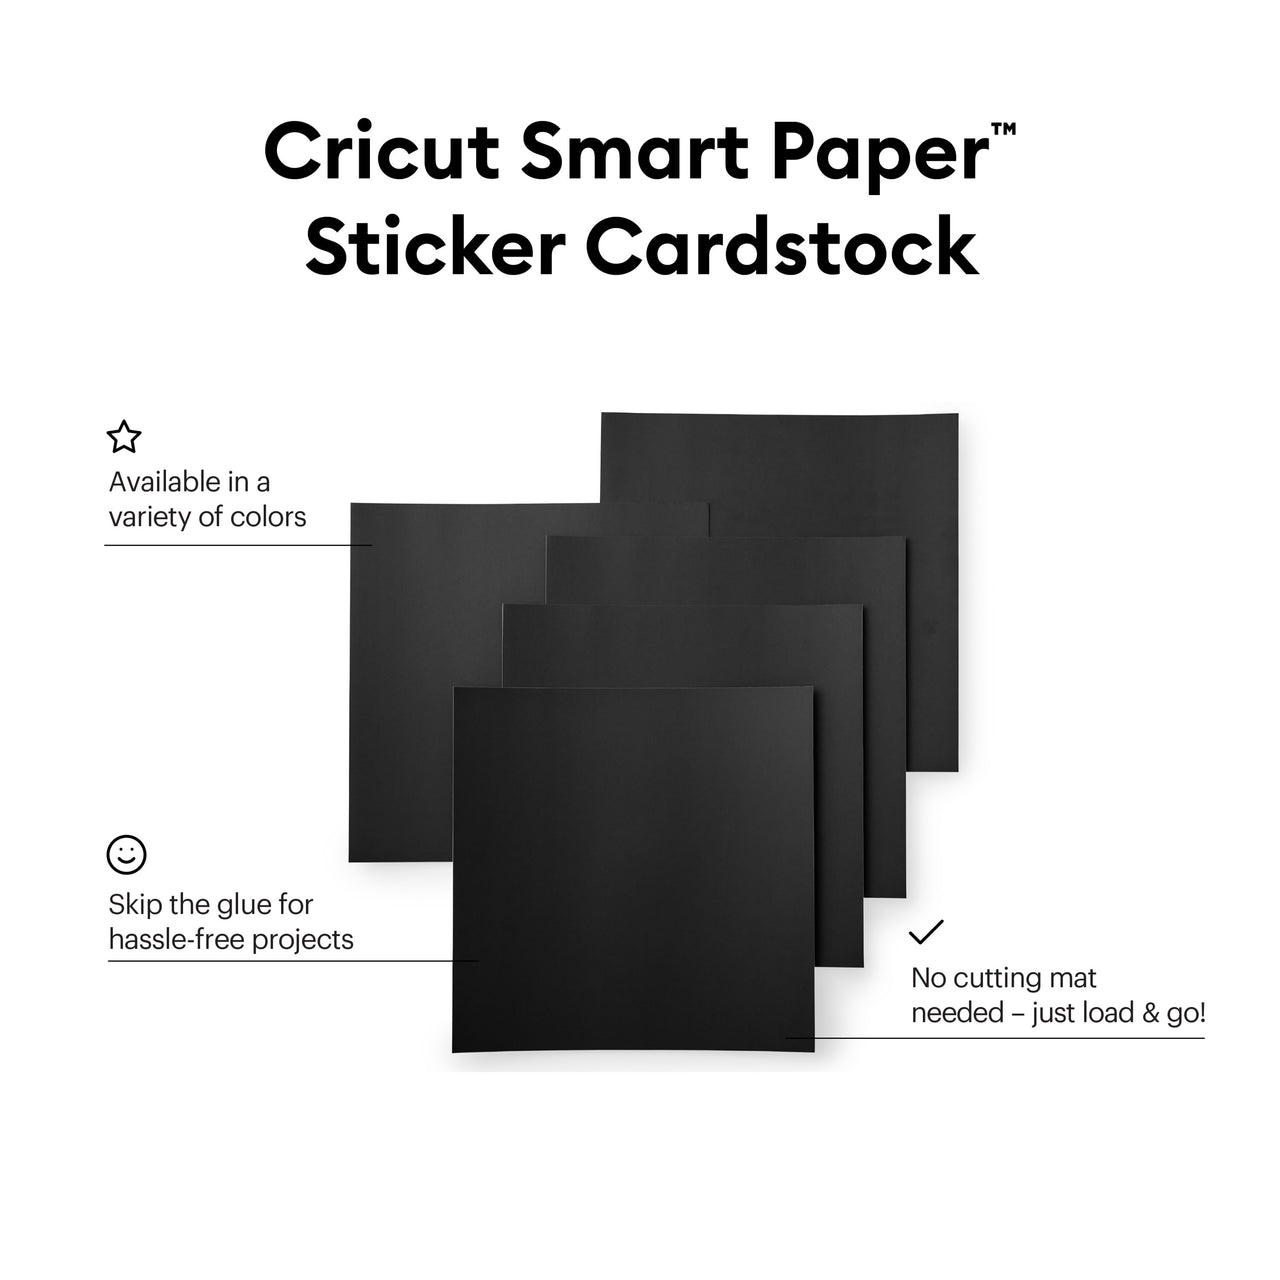 Cricut Smart Paper Sticker Cardstock Black and White Bundle 10 Sheets - 13in x 13in - Adhesive Paper for Stickers